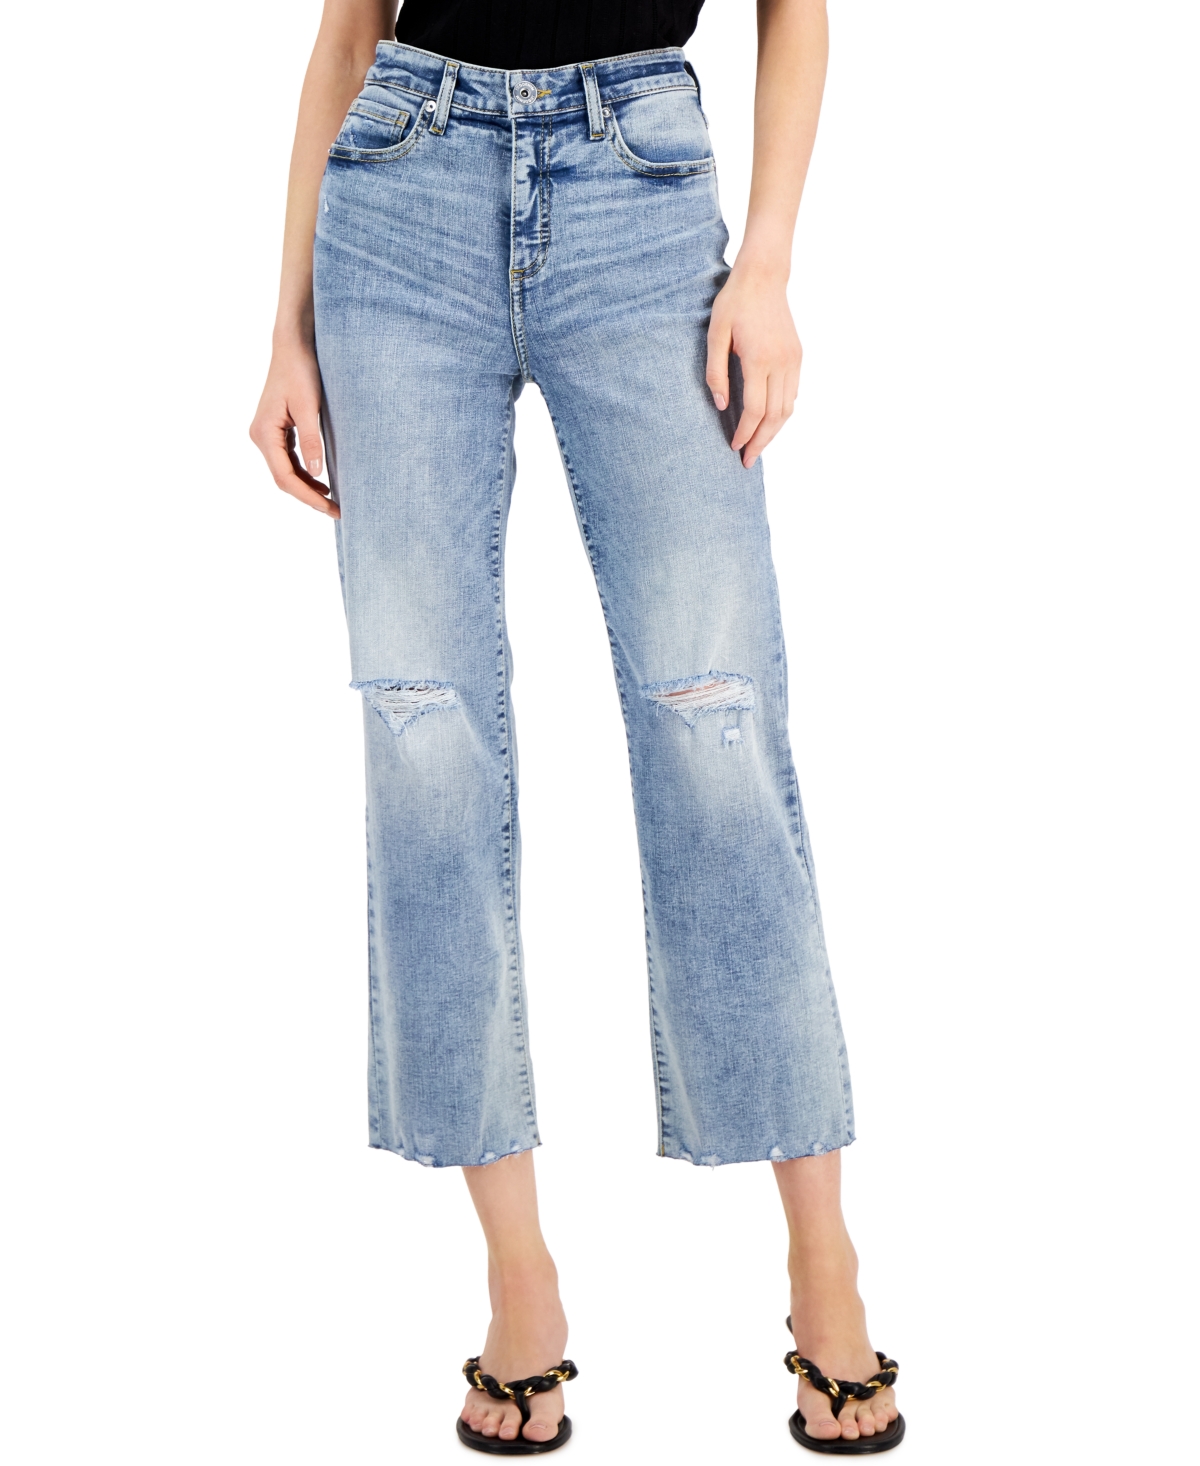  Inc International Concepts Women's High Rise Ripped Straight-Leg Jeans, Created for Macy's